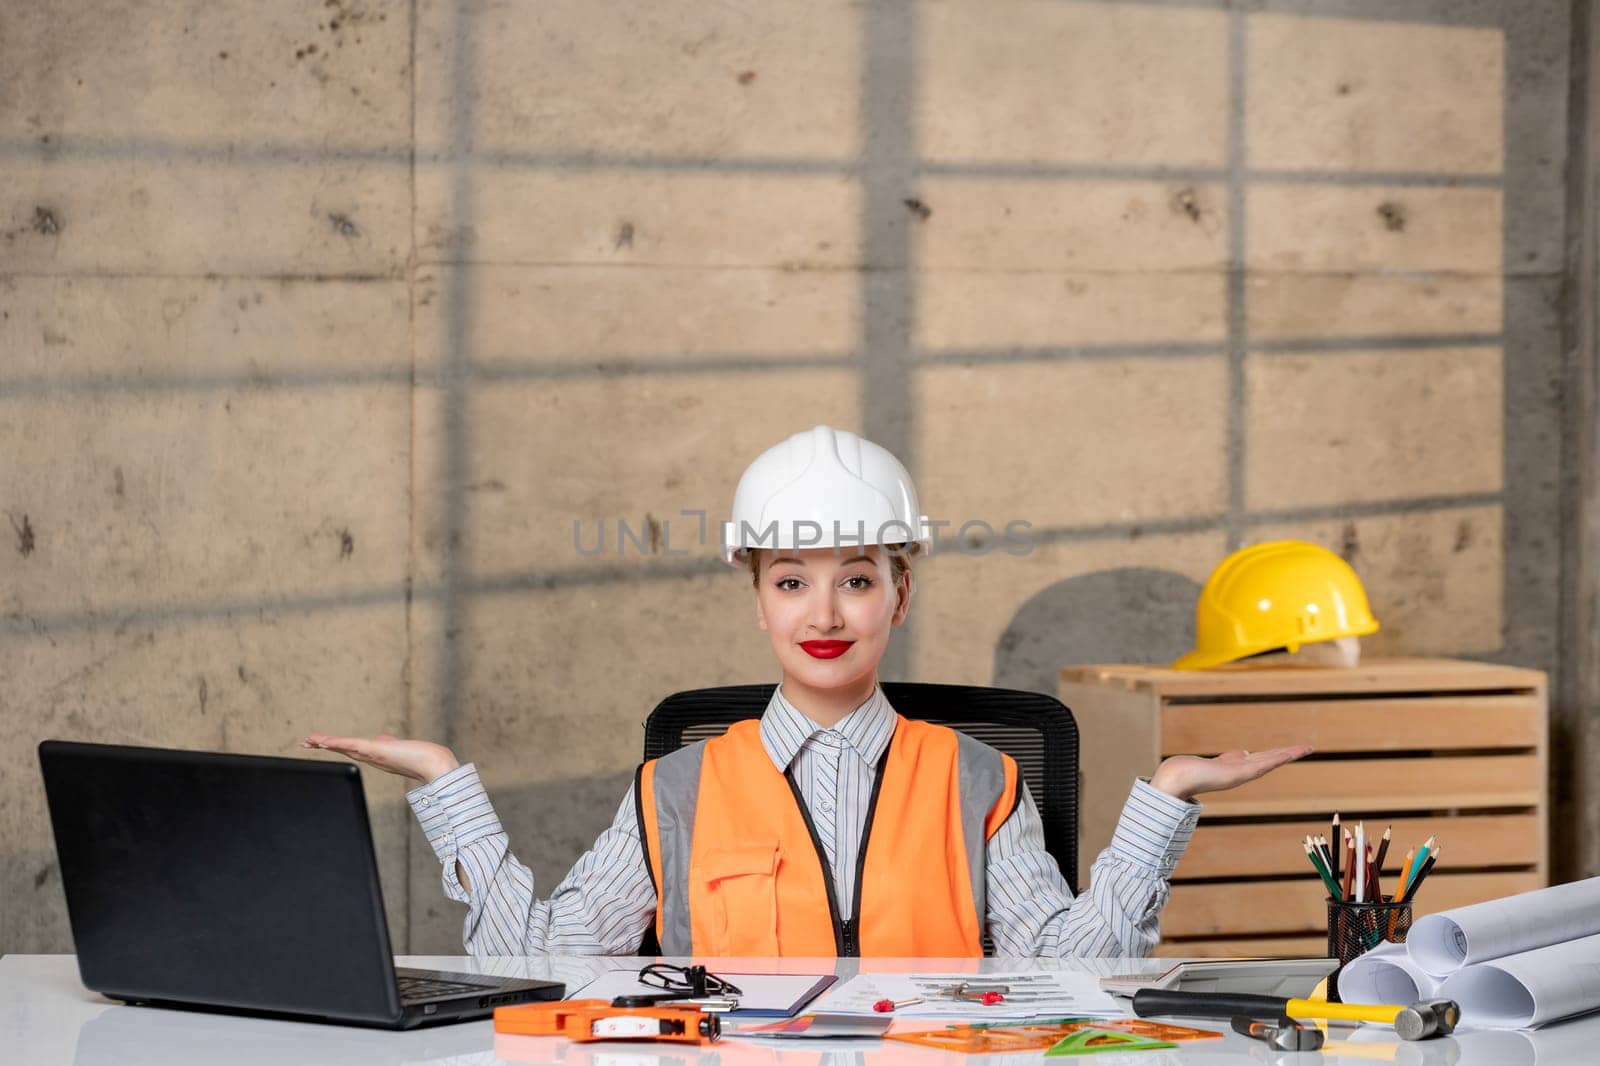 engineer civil worker in helmet and vest smart young cute blonde girl excited about plan